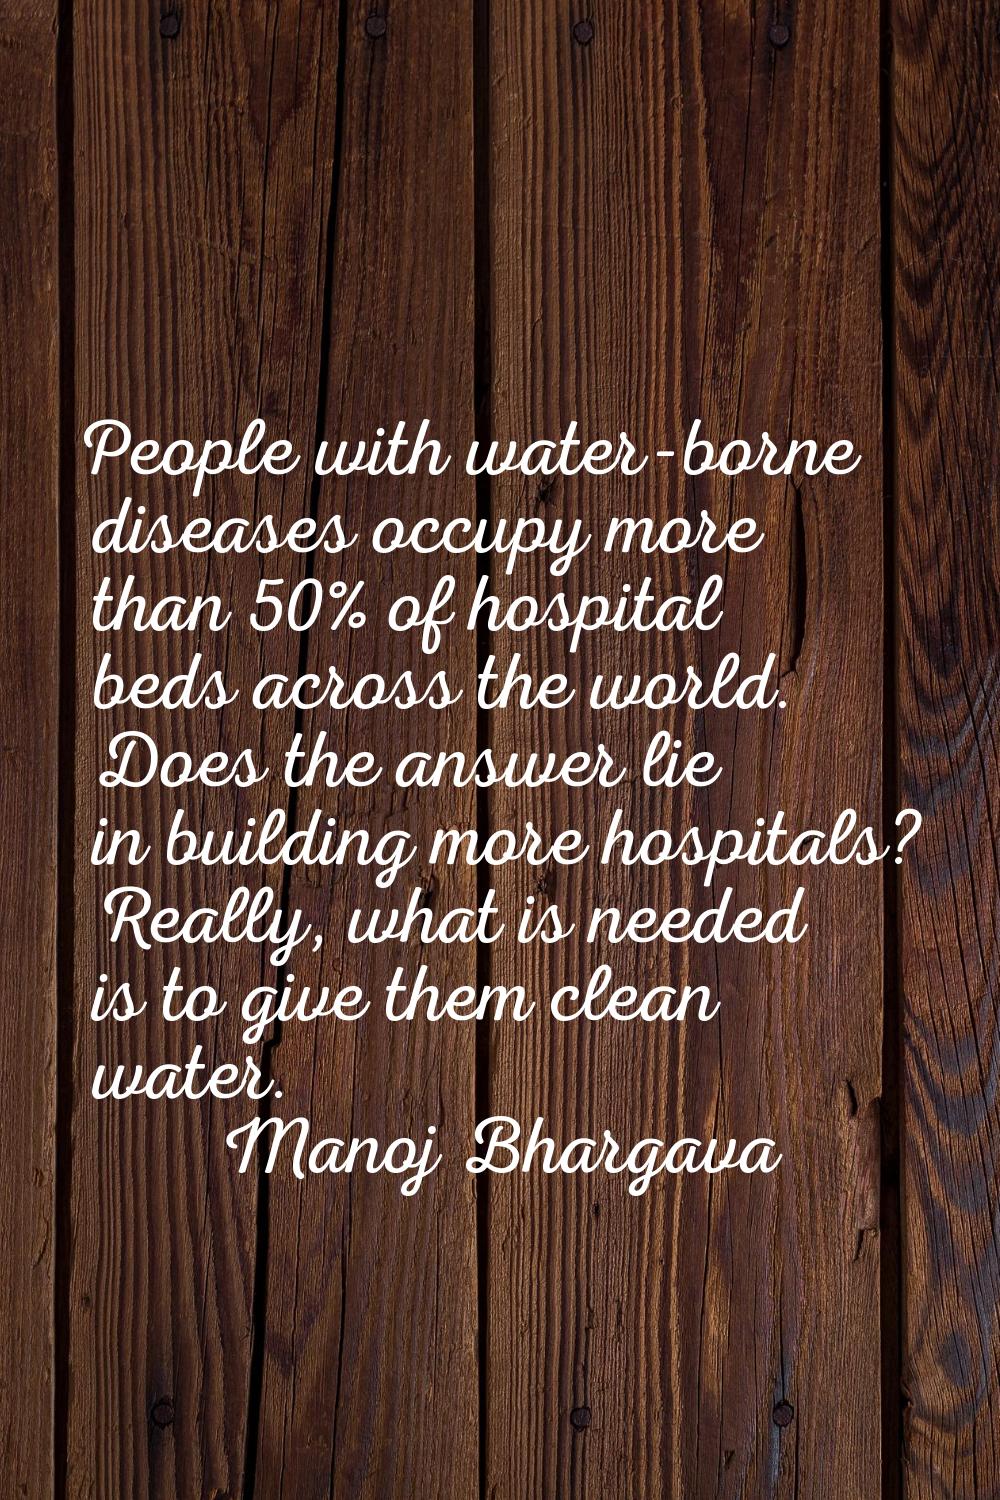 People with water-borne diseases occupy more than 50% of hospital beds across the world. Does the a